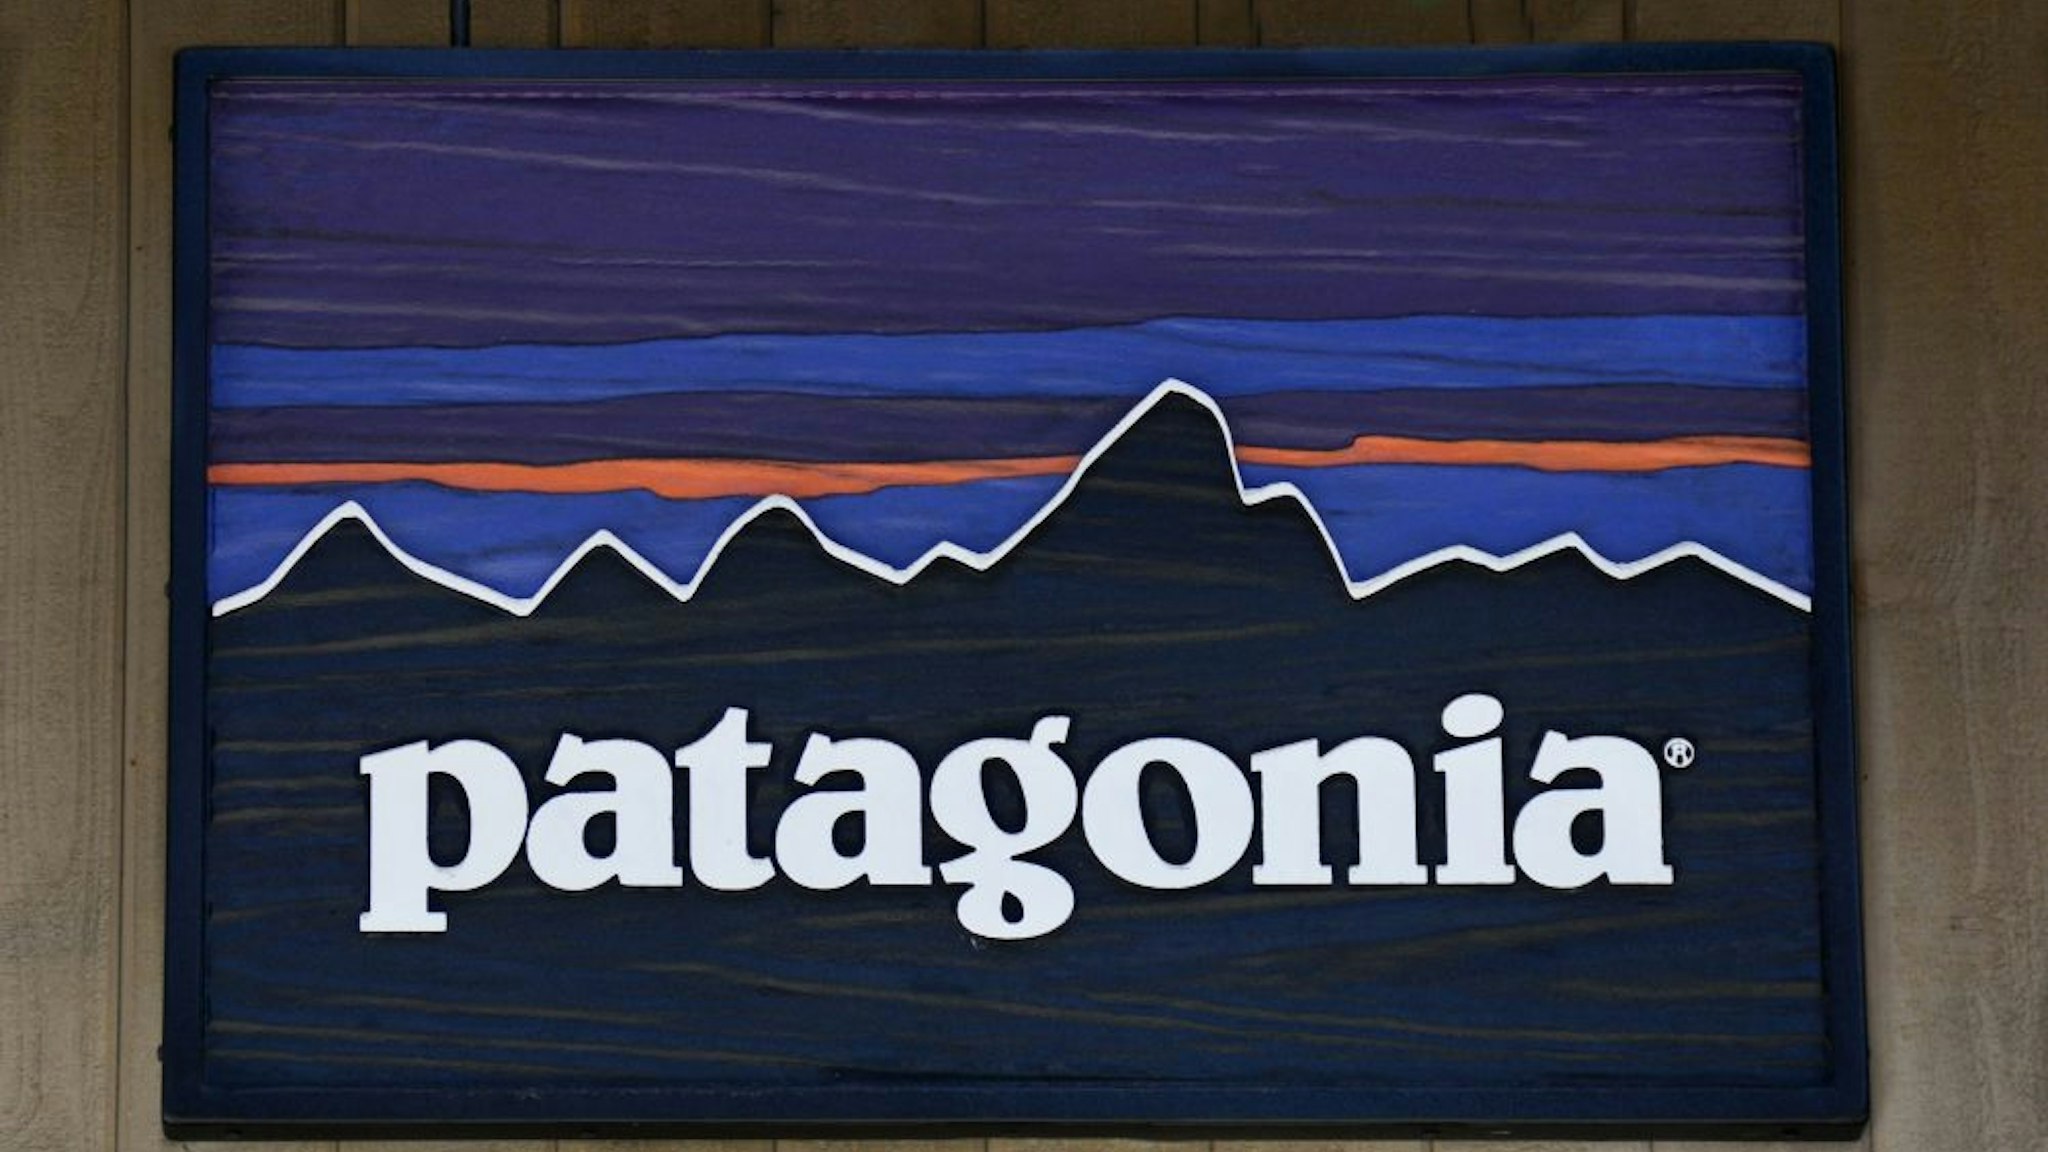 VAIL, CO - JUNE 9, 2017: A sign hangs over the entrance to the Patagonia outdoor clothing shop in Vail, Colorado. The retail chain is based in Ventura, California.